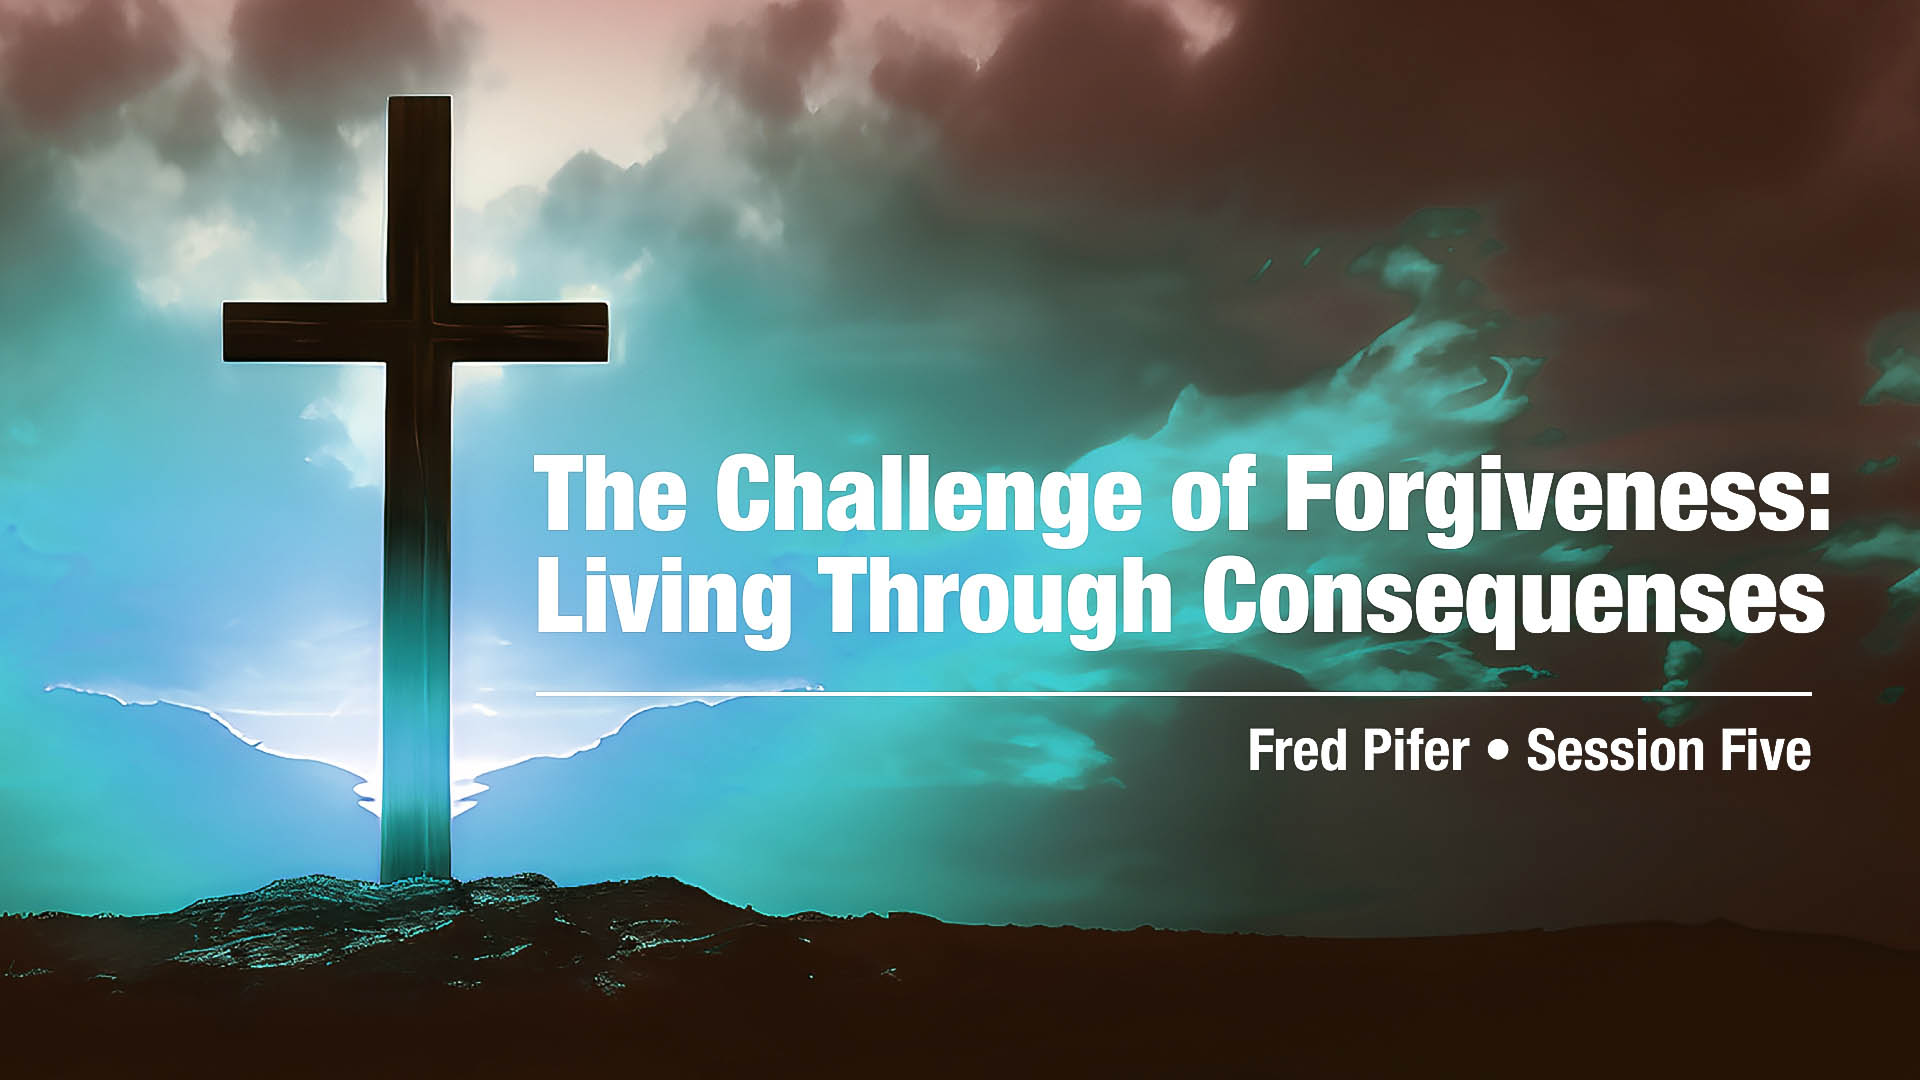 Dunkard Brethren Church| Leadership Conference | The Challenge Of Forgiveness: Living Through Consequenses